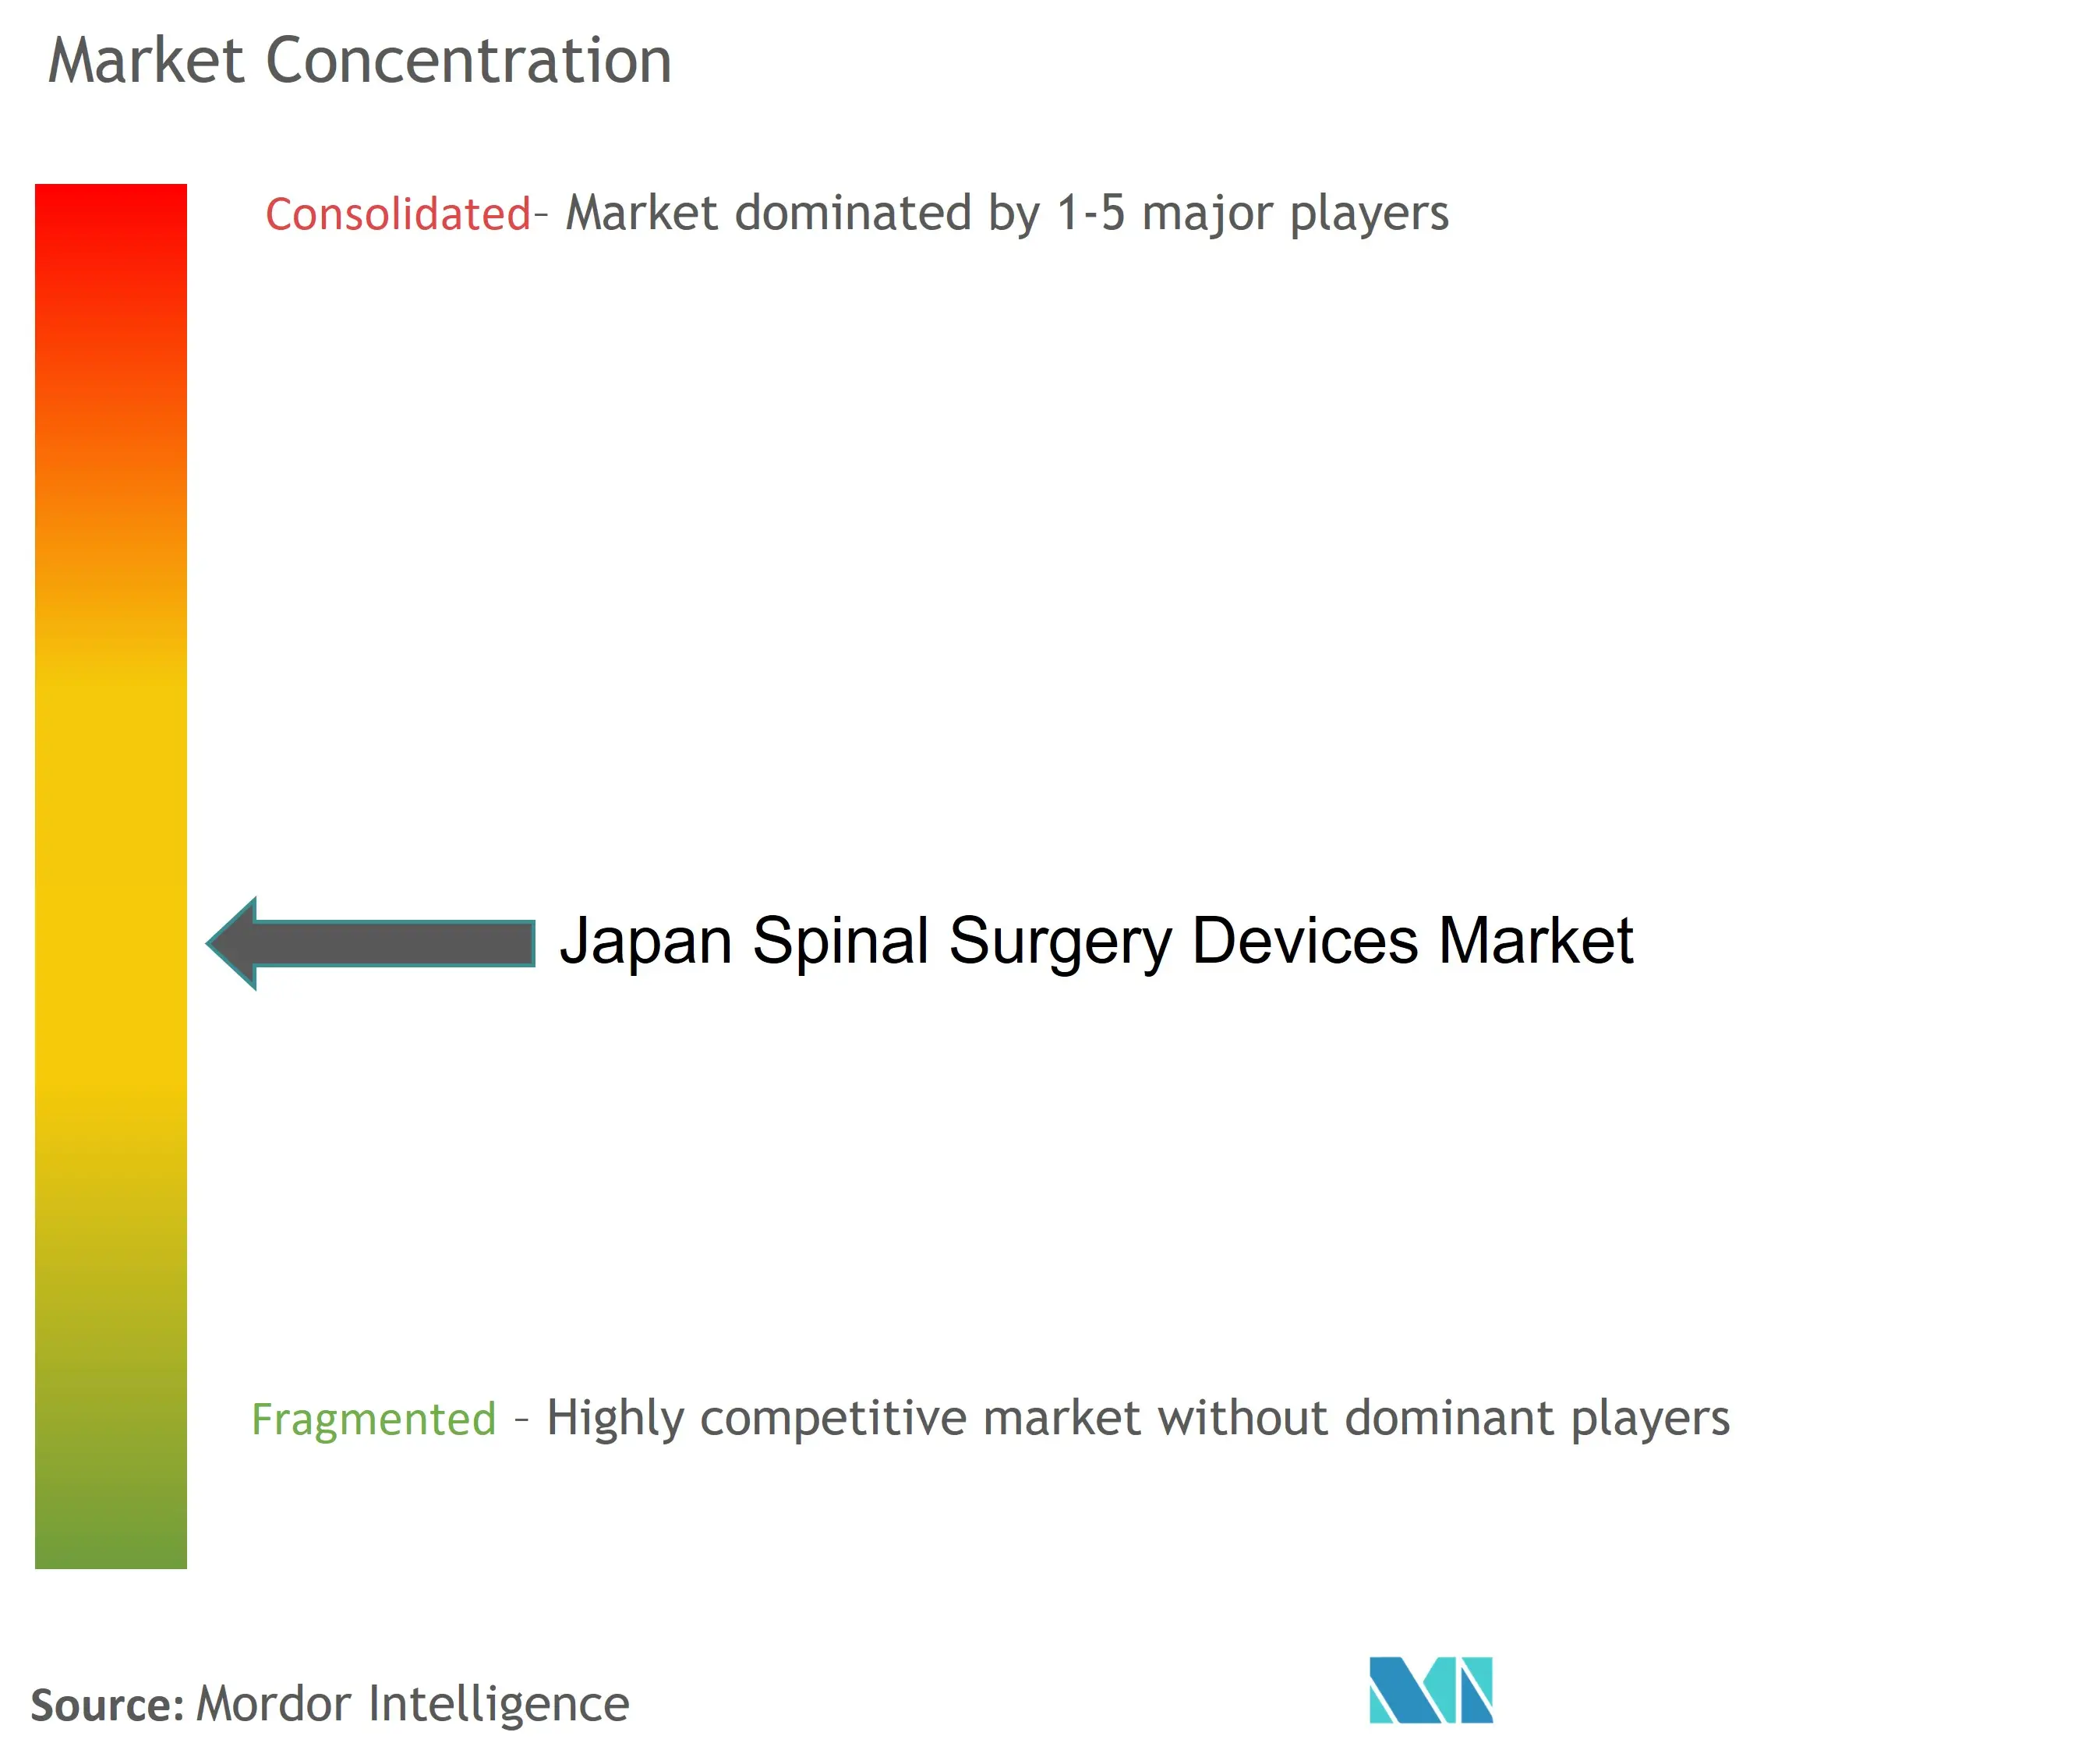 Japan Spinal Surgery Devices Market Concentration